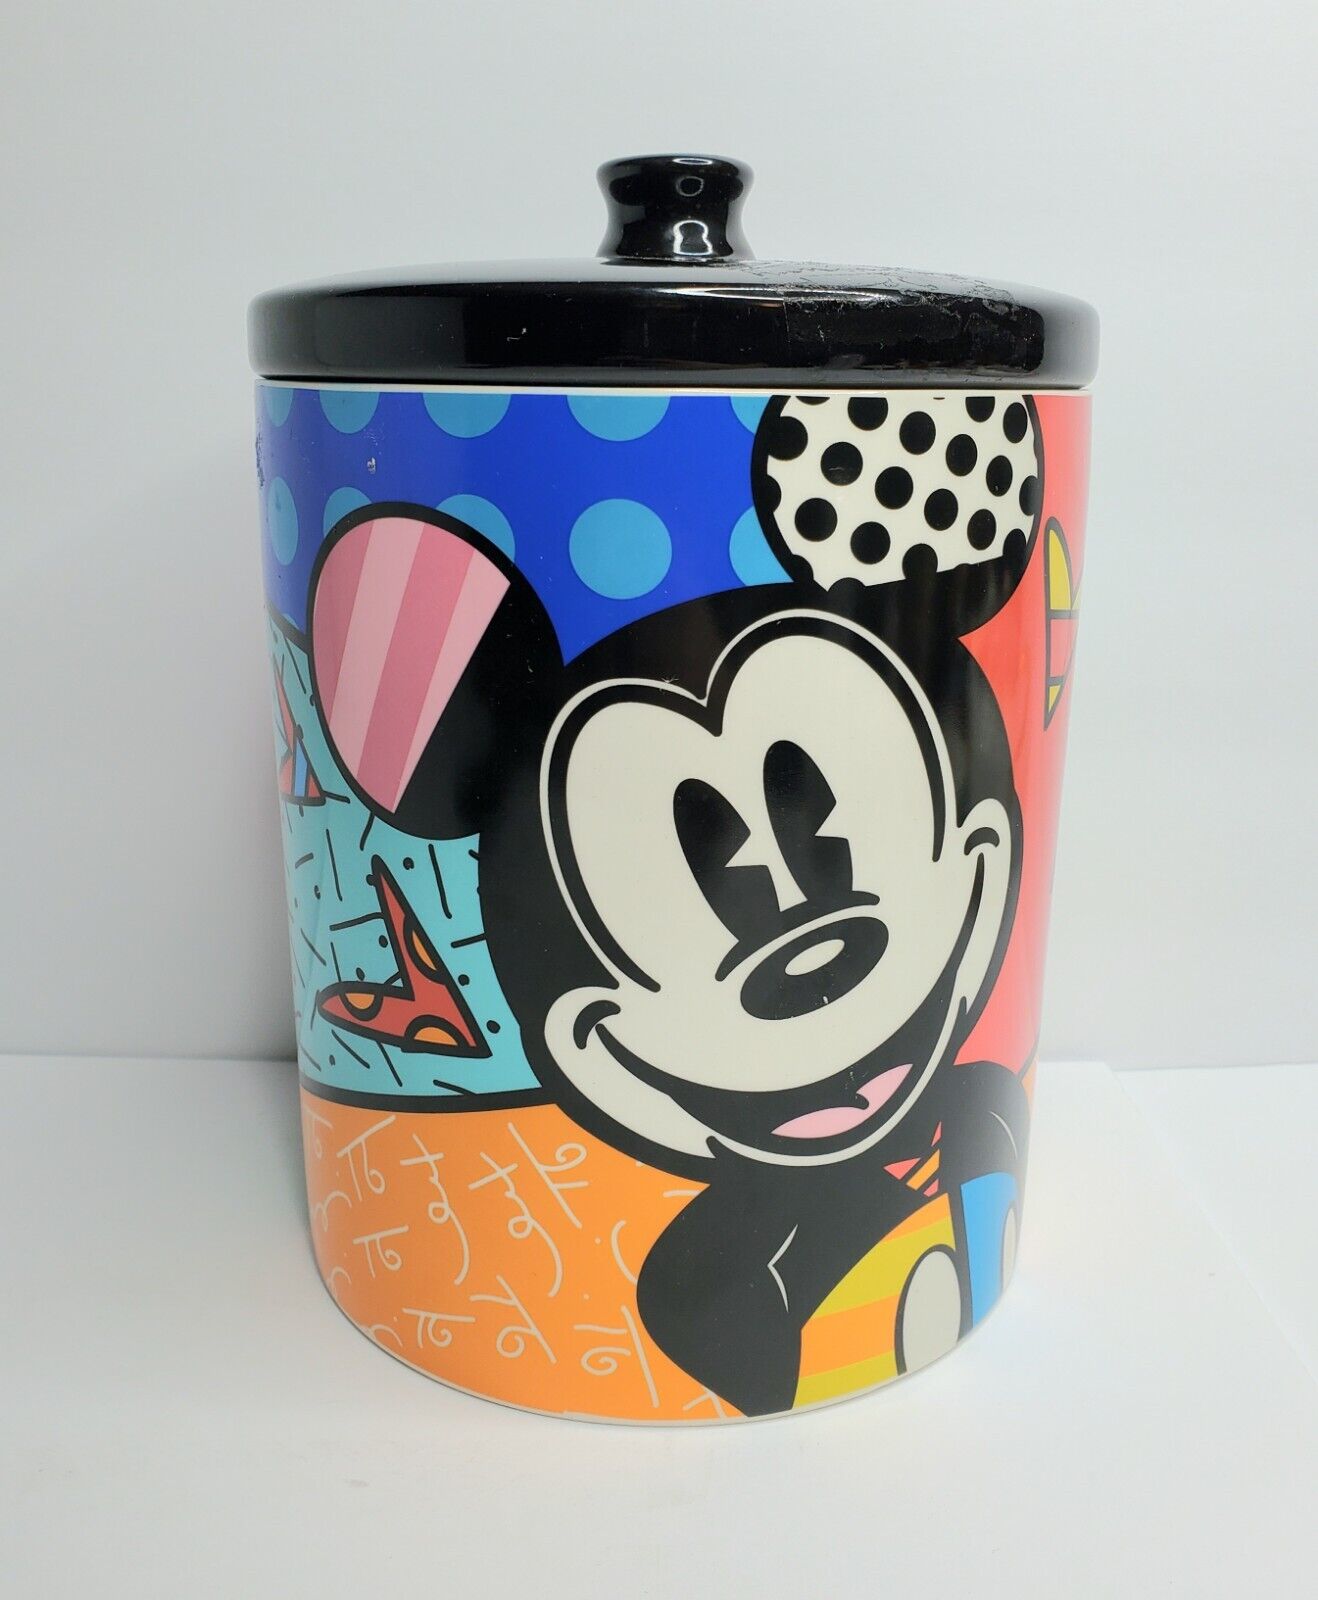 Disney Romero Britto Mickey Mouse Ceramic Biscuit Cookie Jar Storage Canister 